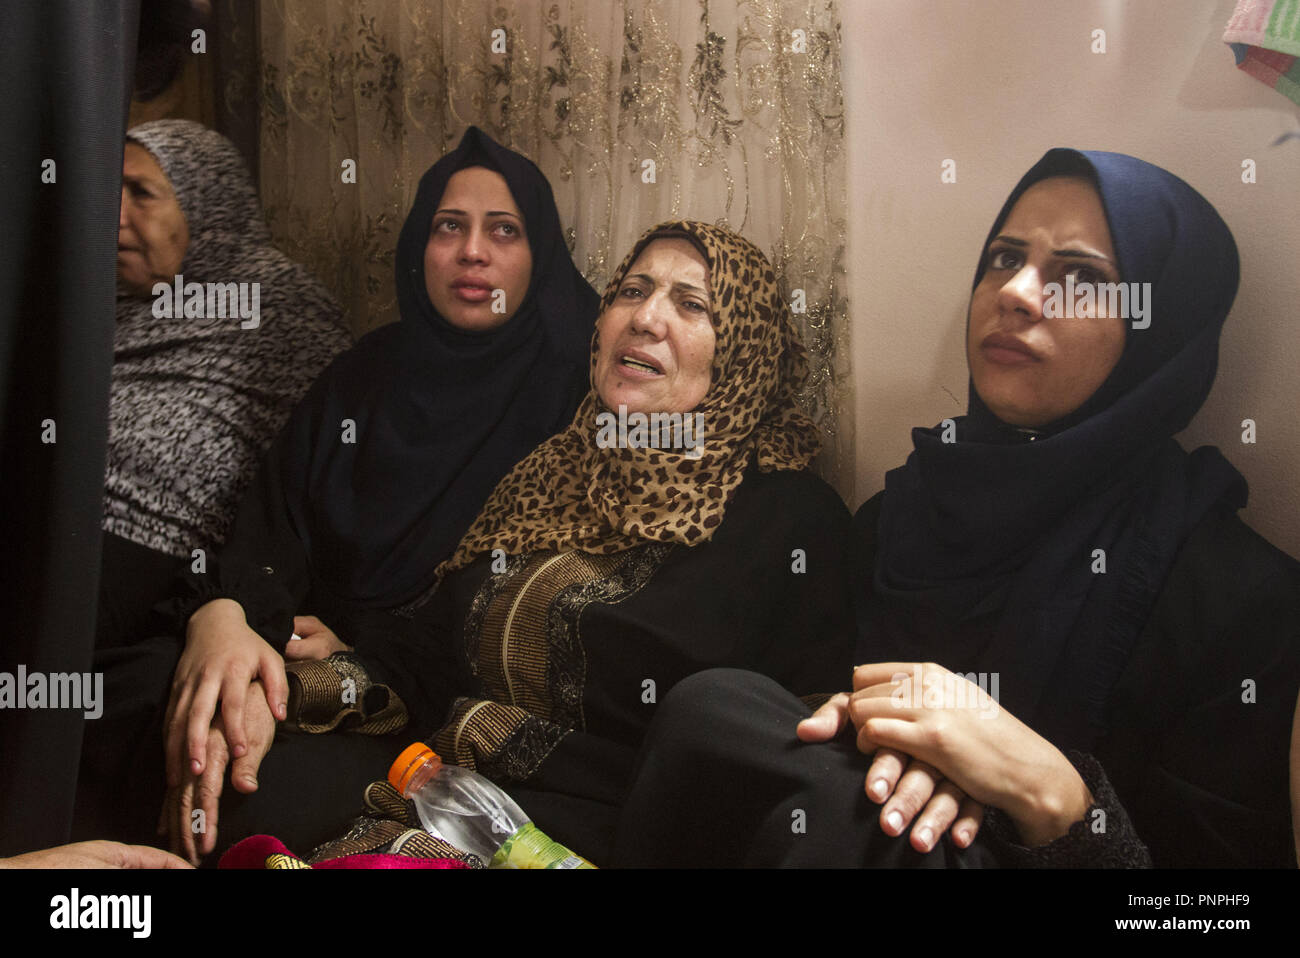 Gaza City, The Gaza Strip, Palestine. 22nd Sep, 2018. Relatives of Palestinian Karim Kallab, killed during a demonstration near the border between Israel and Gaza, mourning at his funeral in Gaza City, 22 September 2018. Credit: Mahmoud Issa/Quds Net News/ZUMA Wire/Alamy Live News Stock Photo